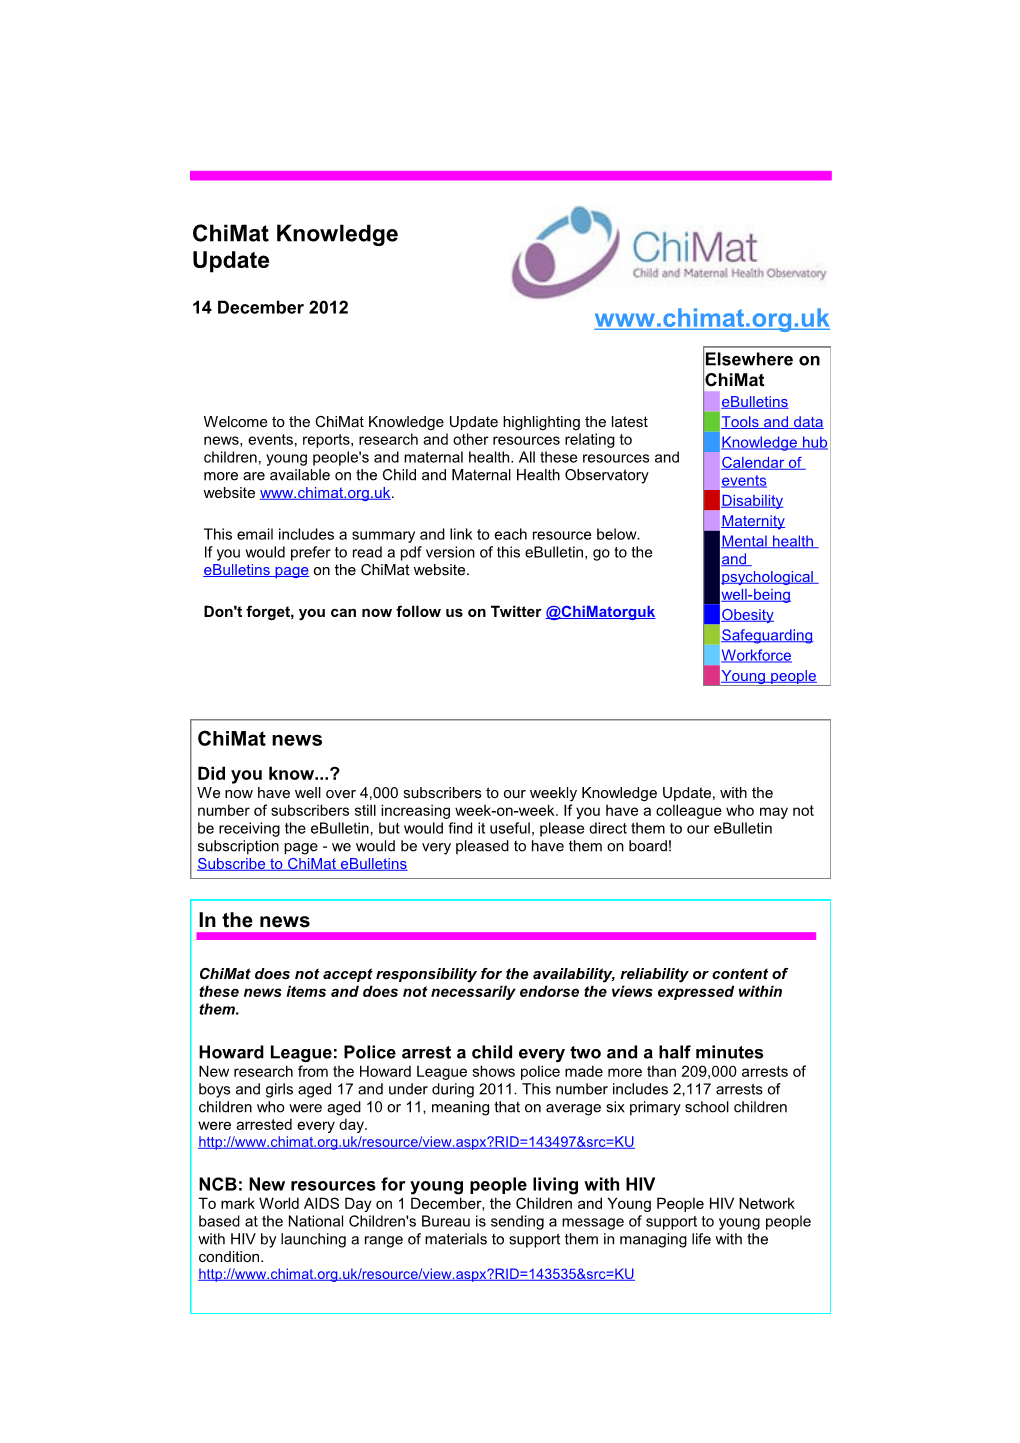 Chimat Knowledge Update on Children's, Young People's and Maternal Health